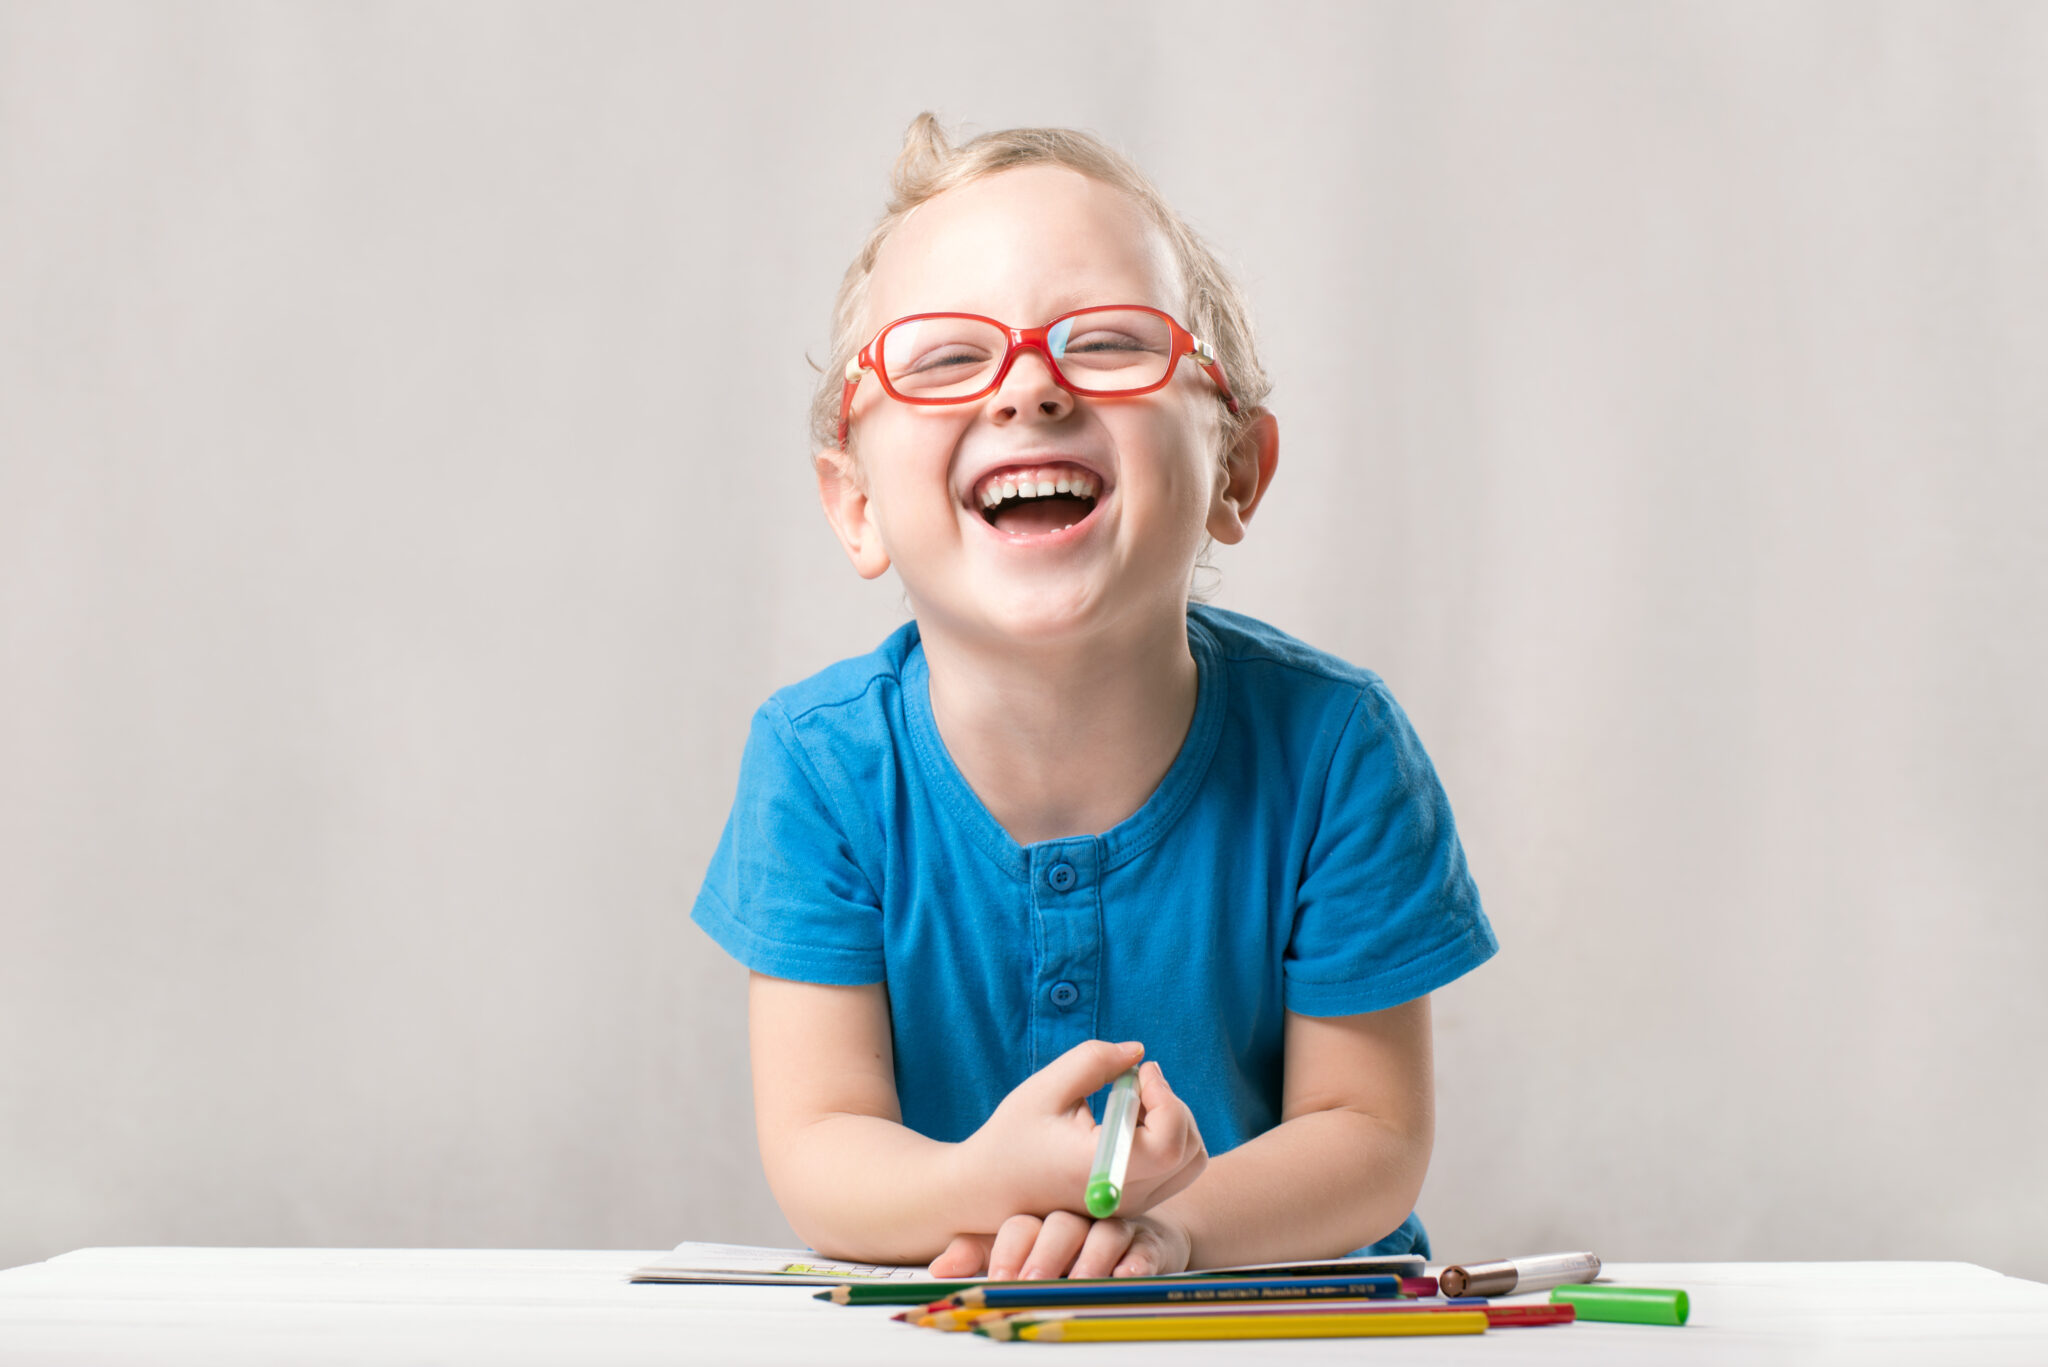 laughing boy coloring on desk